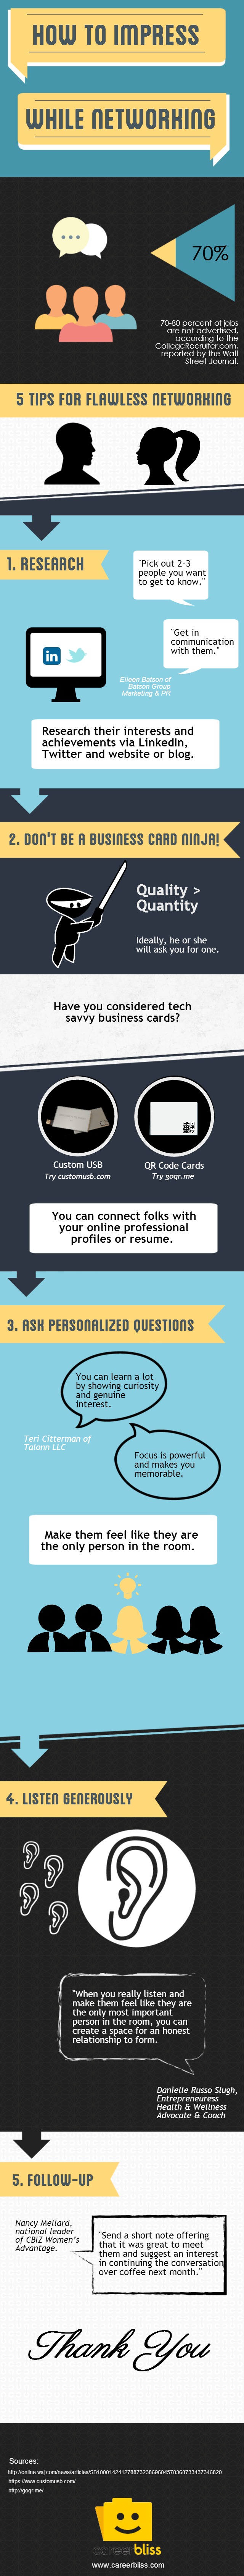 CareerBliss Infographic